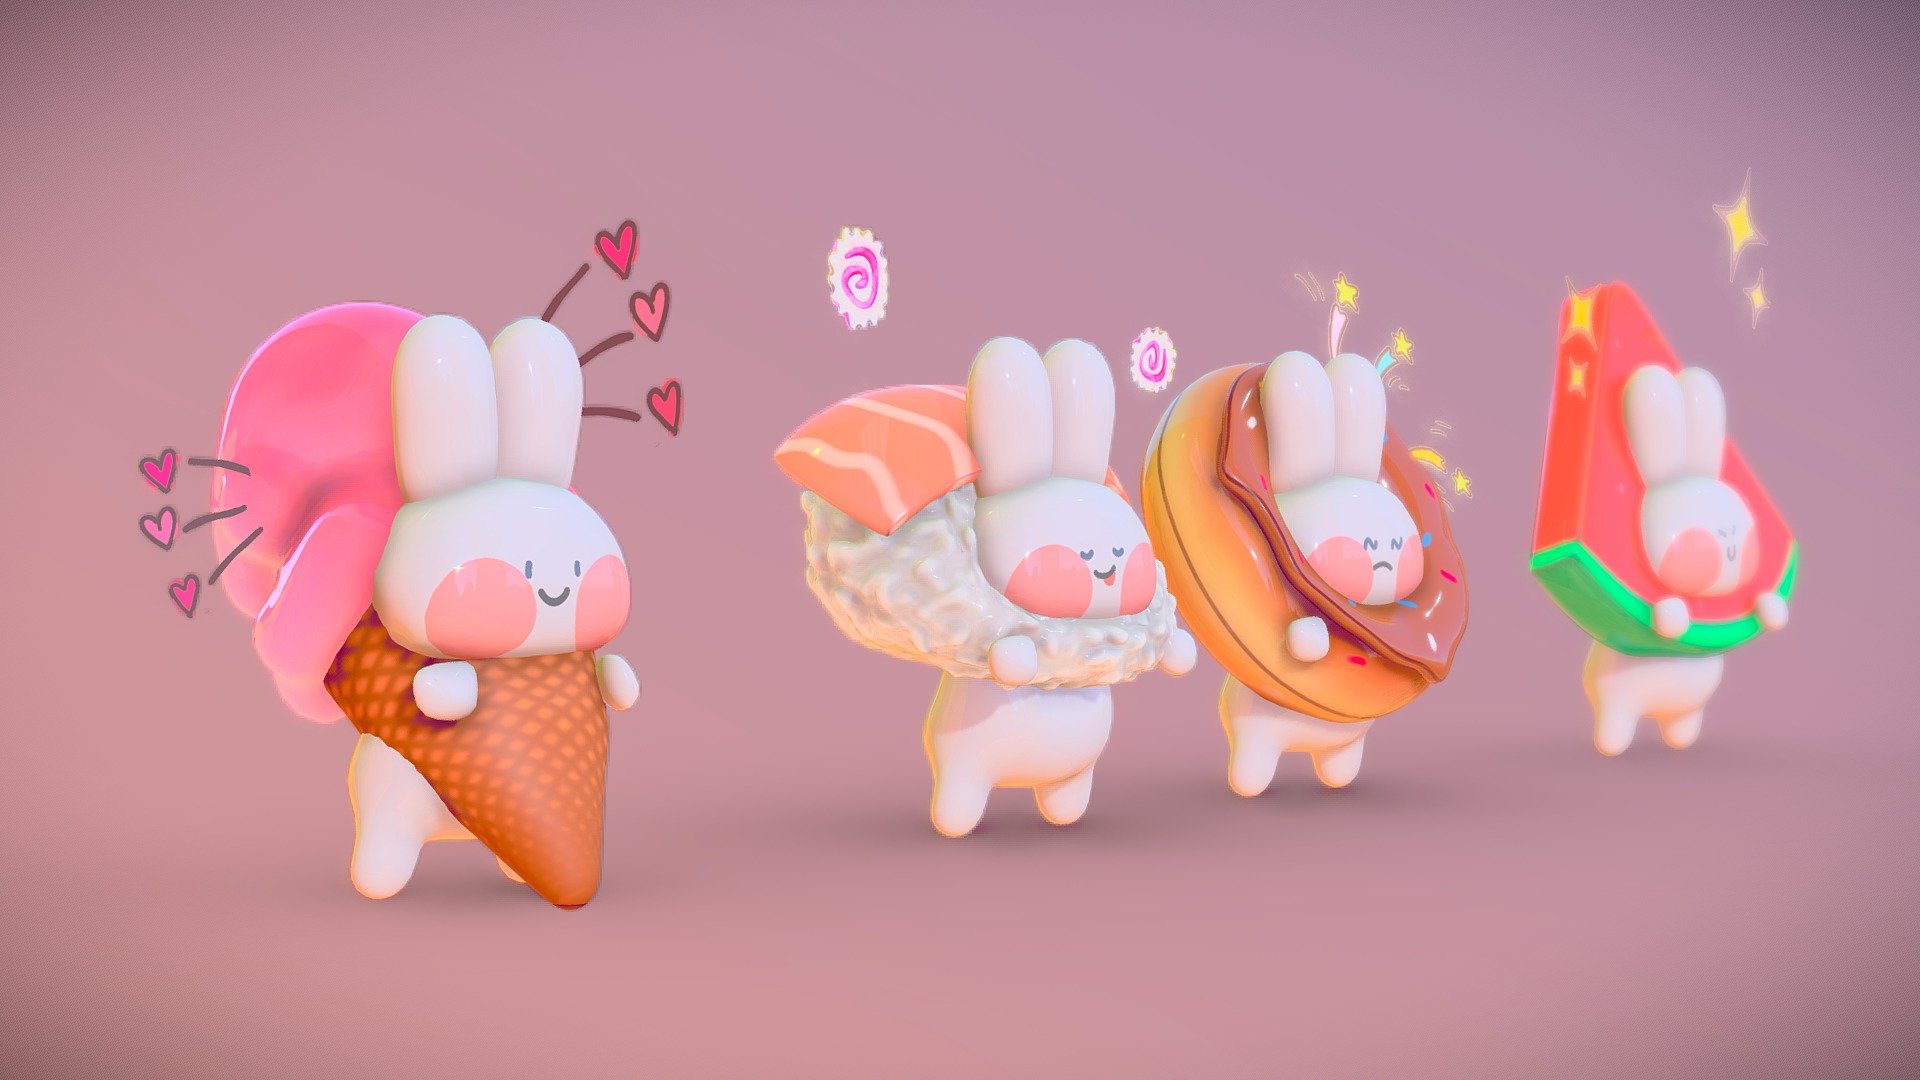 kawaii bunnies
inspired by this little cuties
 - Bunny - 3D model by naira001 3d model